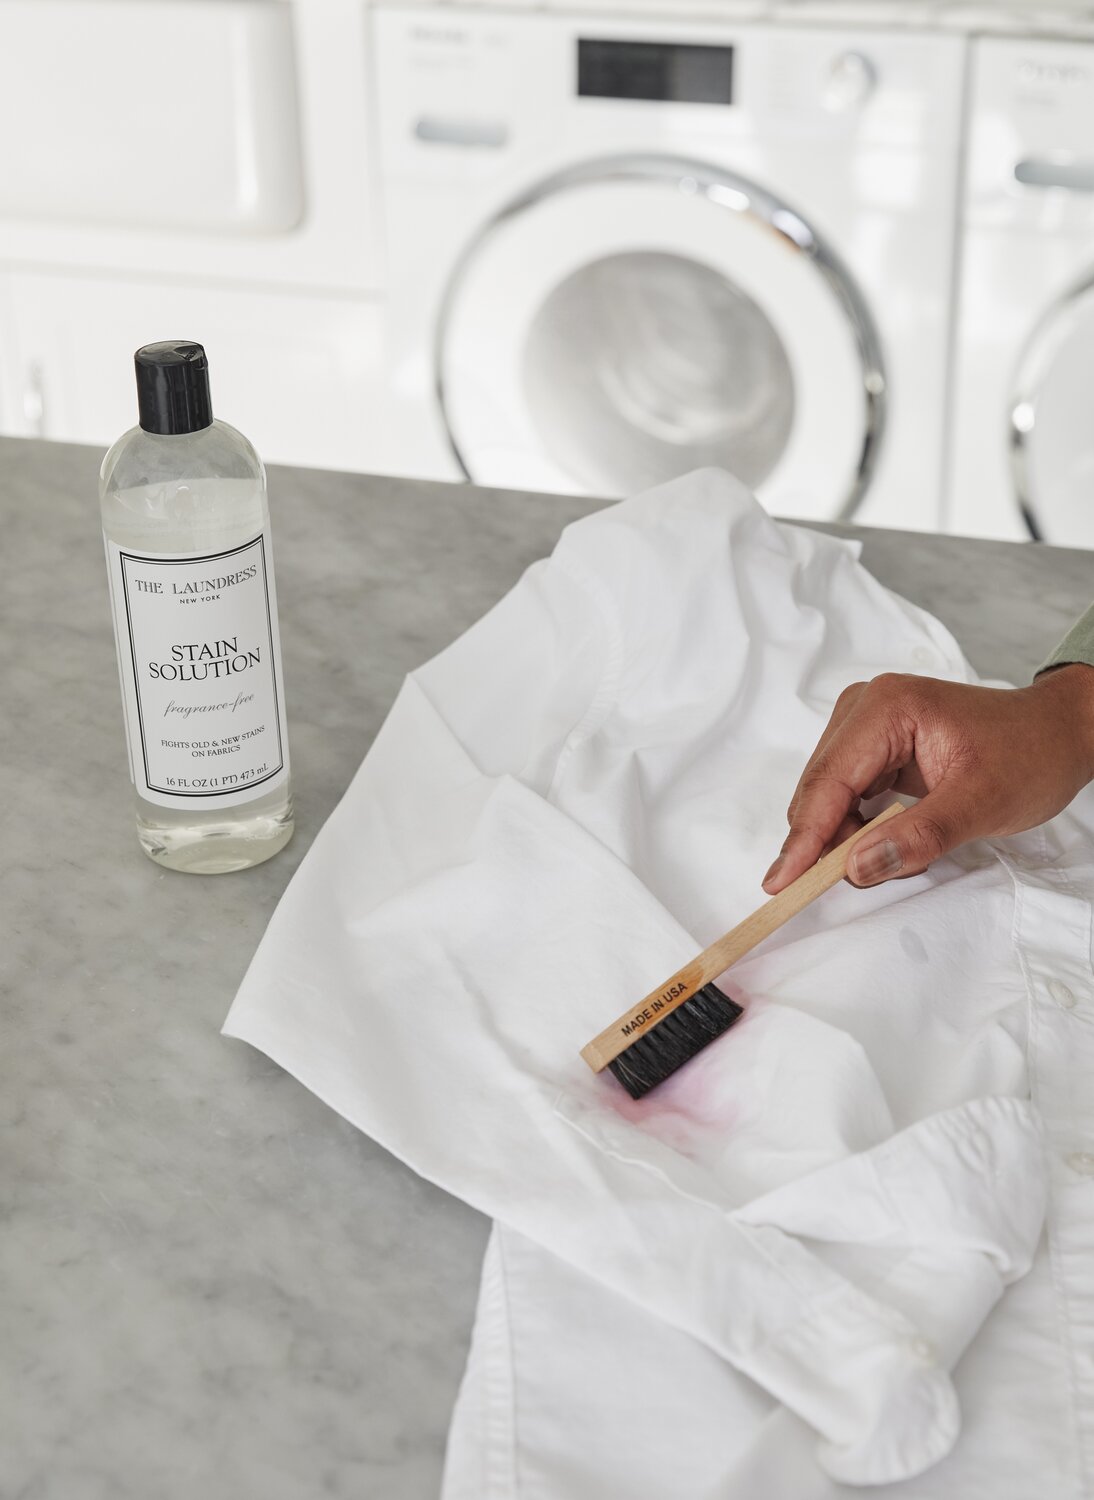 applying the laundress stain solution to white shirt